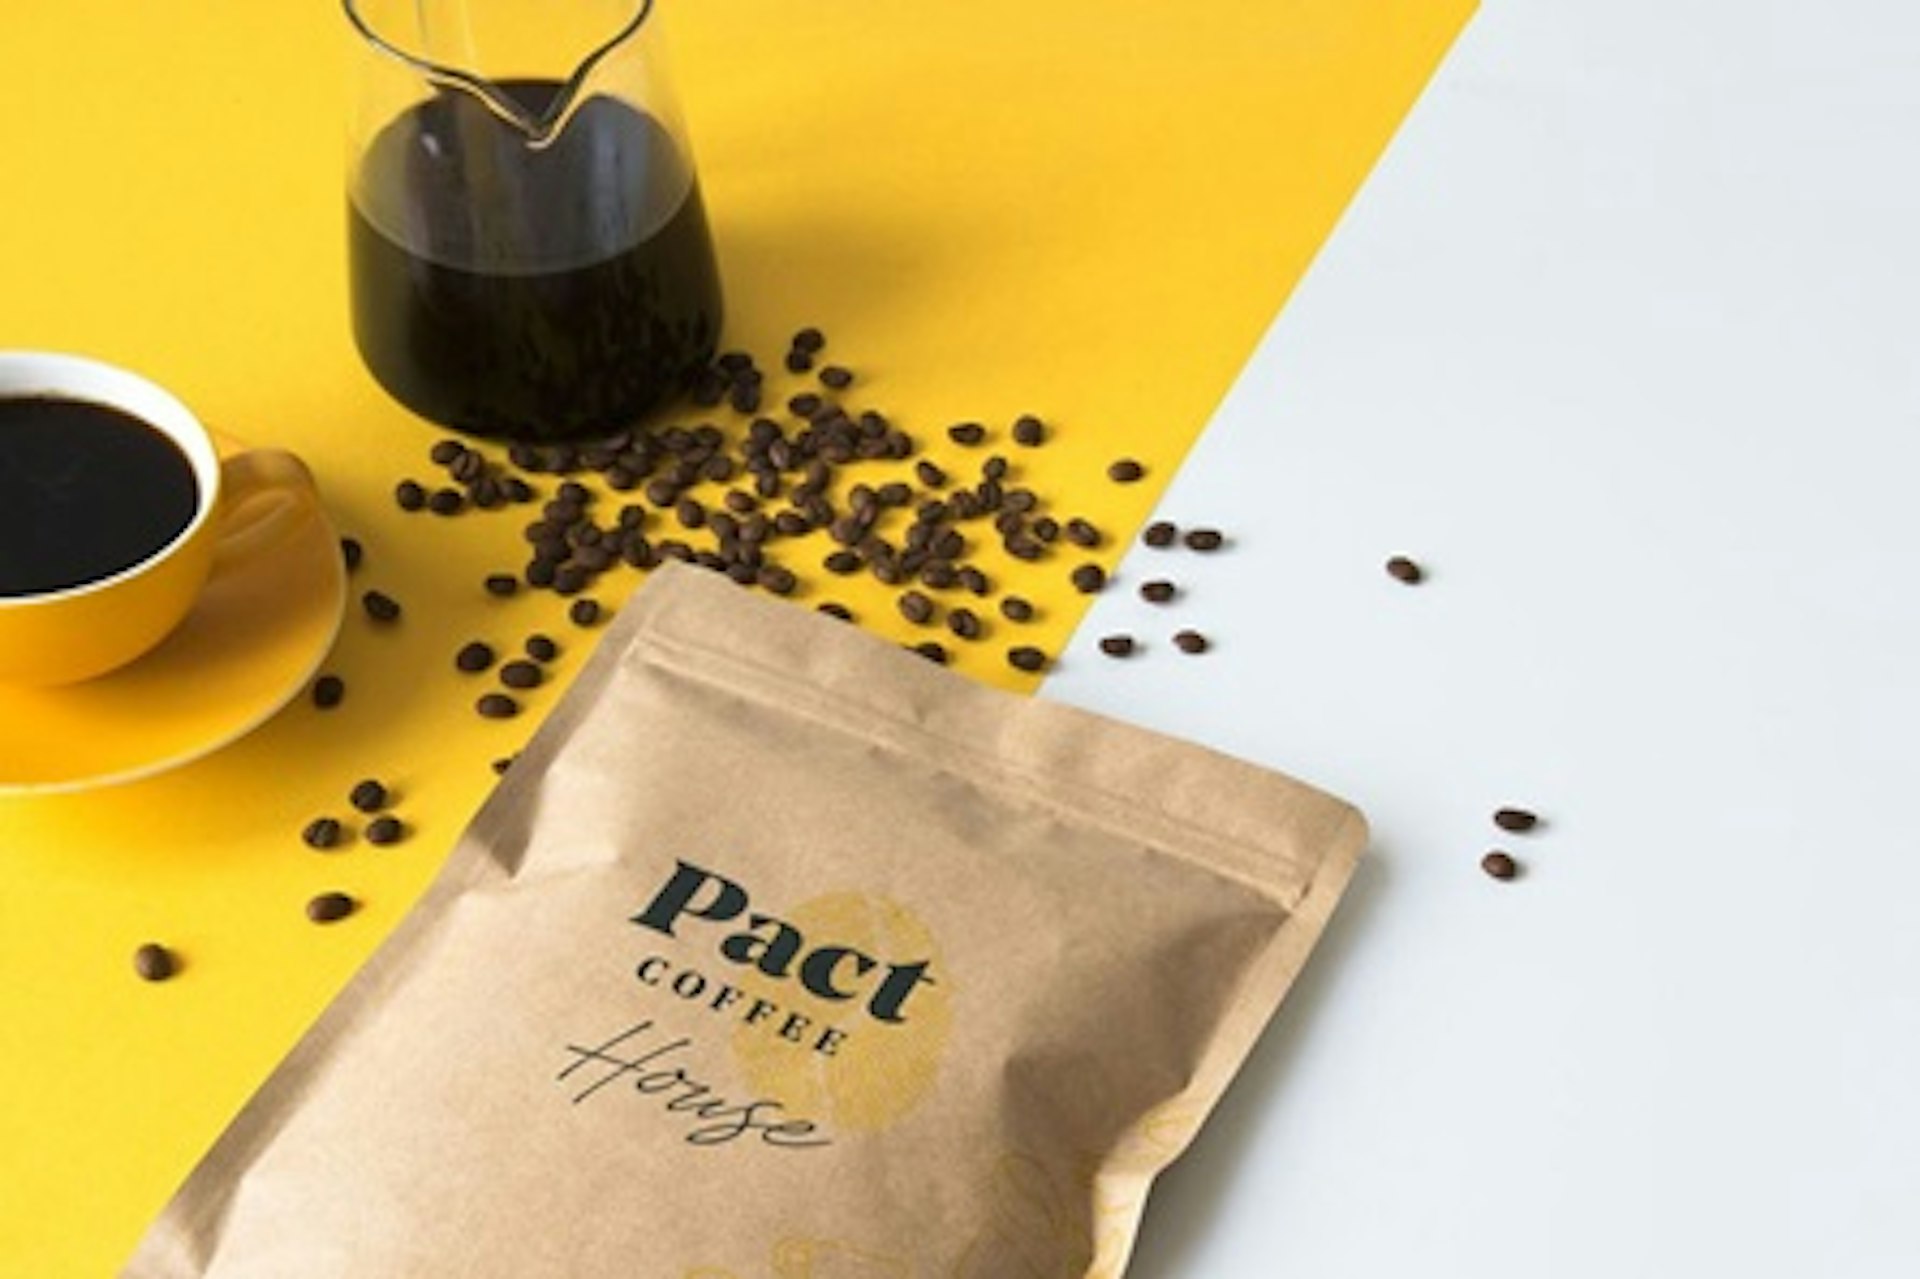 Three Month Subscription of Award Winning Pact Coffee 2